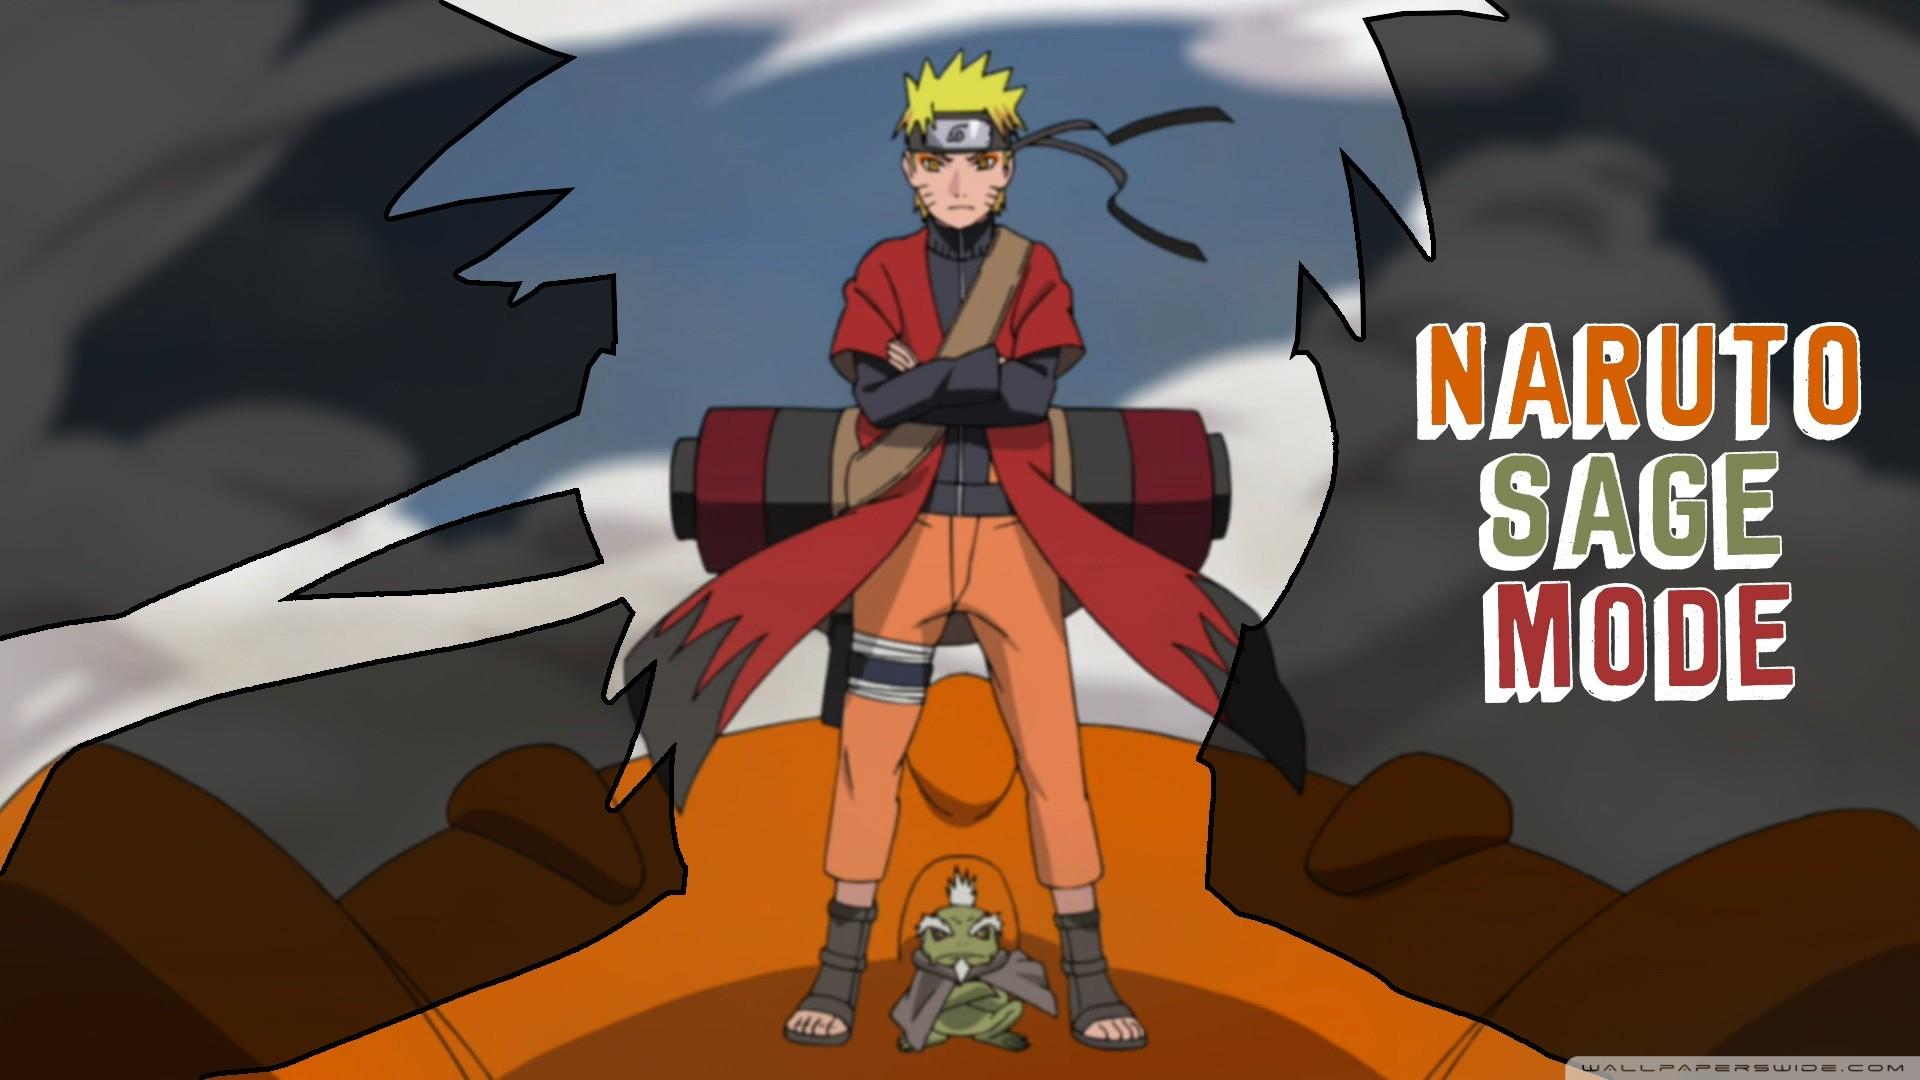 Naruto Sage Mode Wallpaper (the best image in 2018)